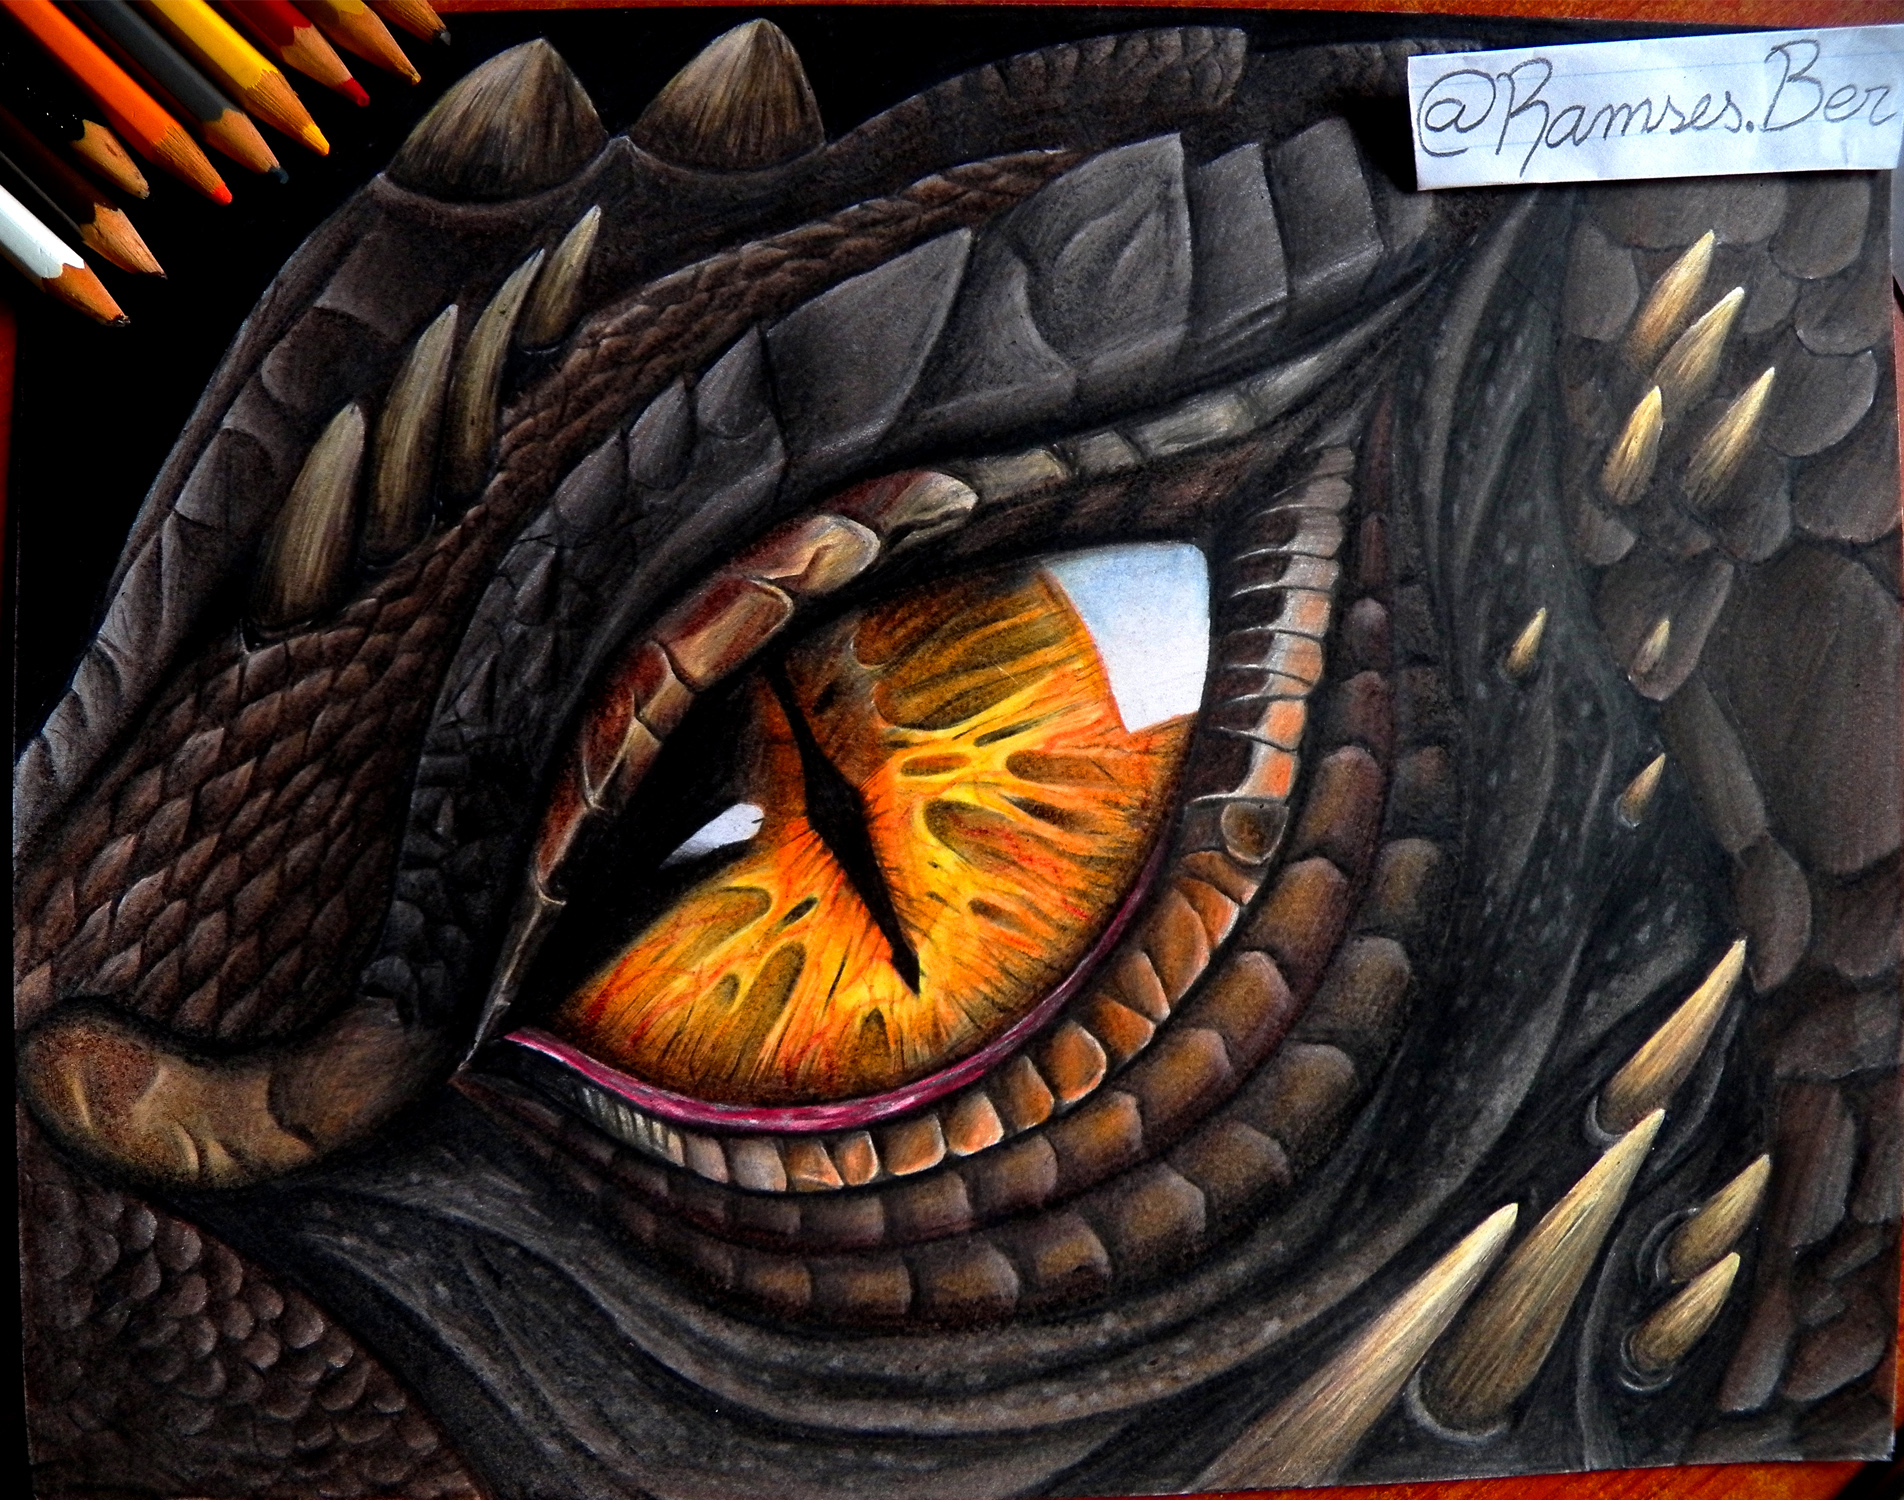 TIME LAPSE) Drawing a dragon eye with school Faber-Castell colors // "...